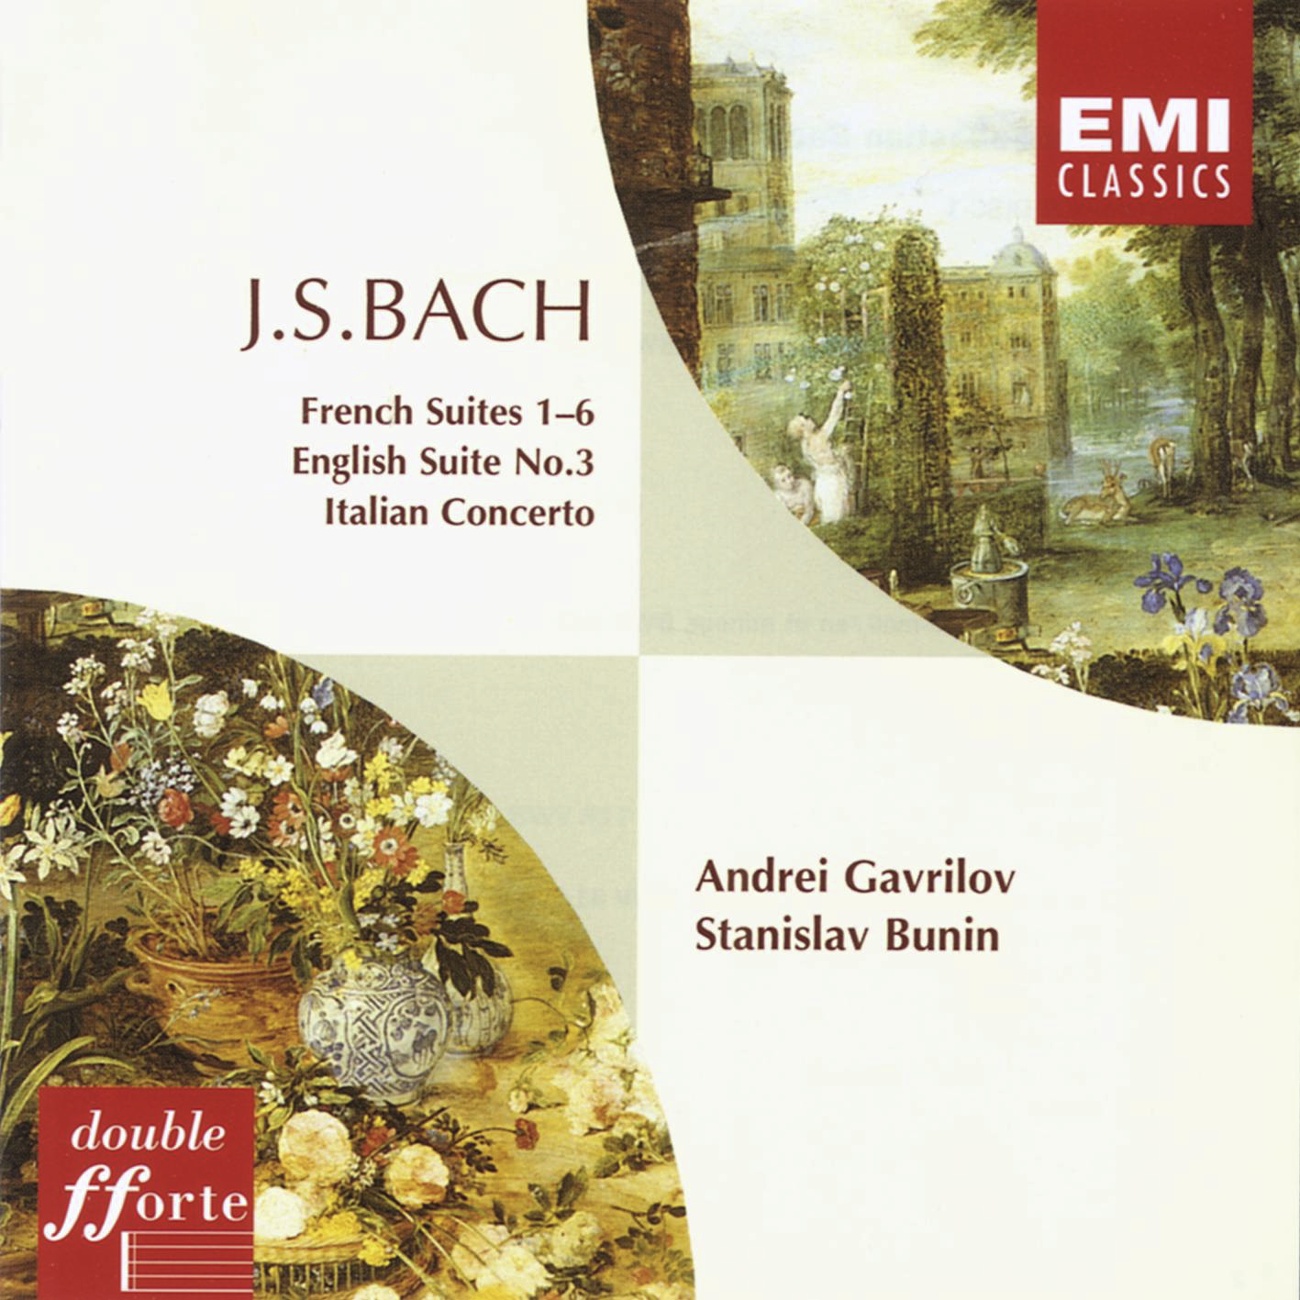 Bach: French Suite 4 In E Flat, Bwv 815: VI. Air